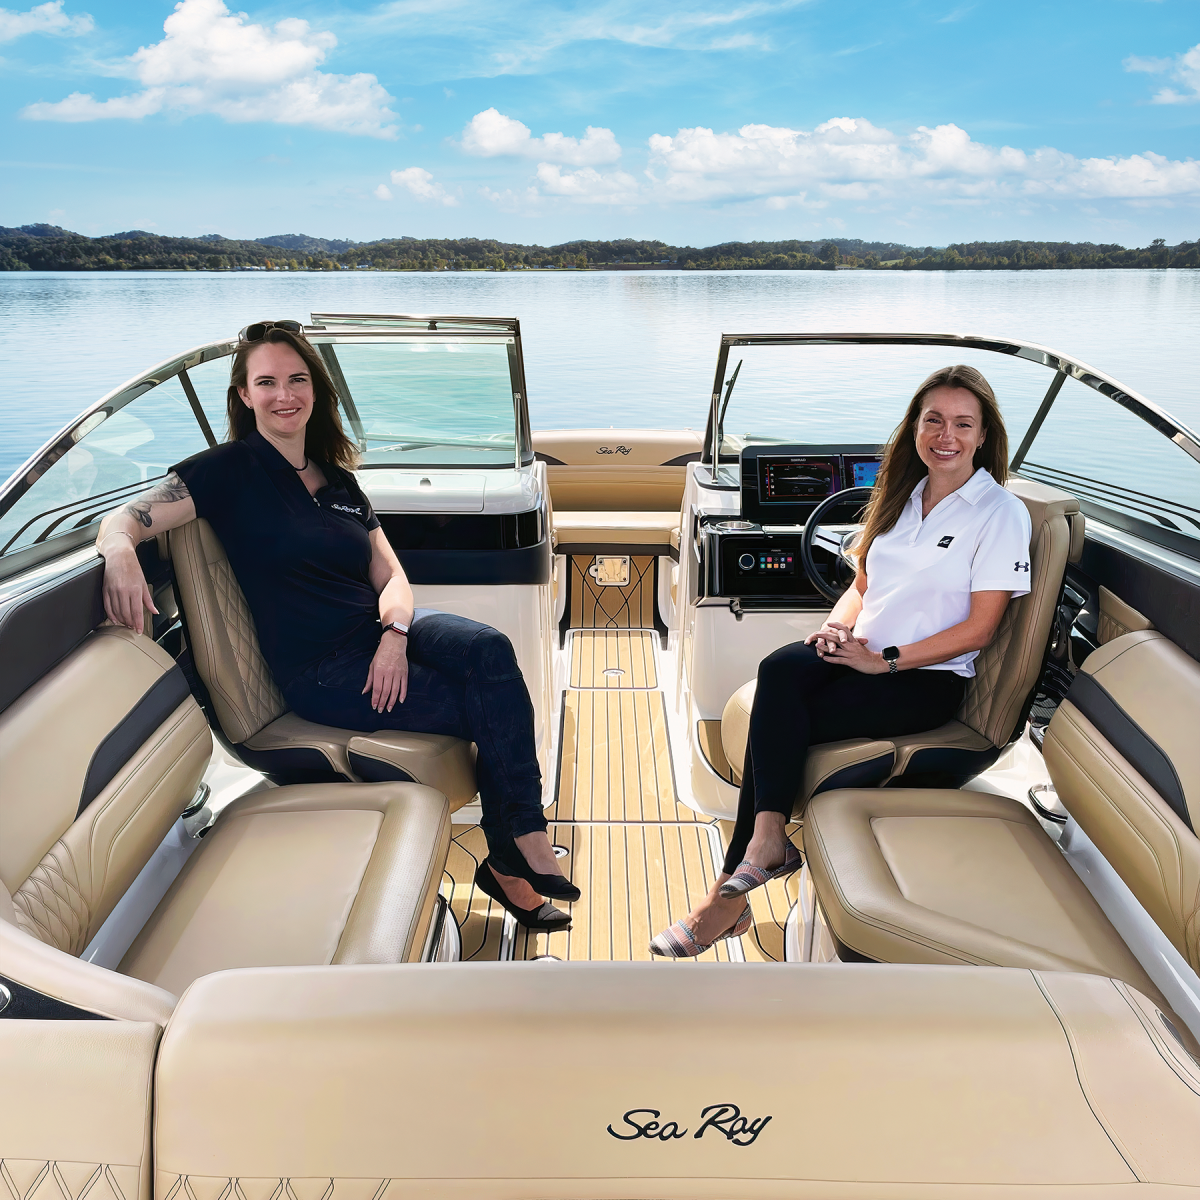 The SLX 260 is Sea Ray’s first model developed by an all-women design team: Brunswick Boat Group senior industrial designer Kristin McGinnis (left) and Sea Ray senior design manager Carrie Fodor.